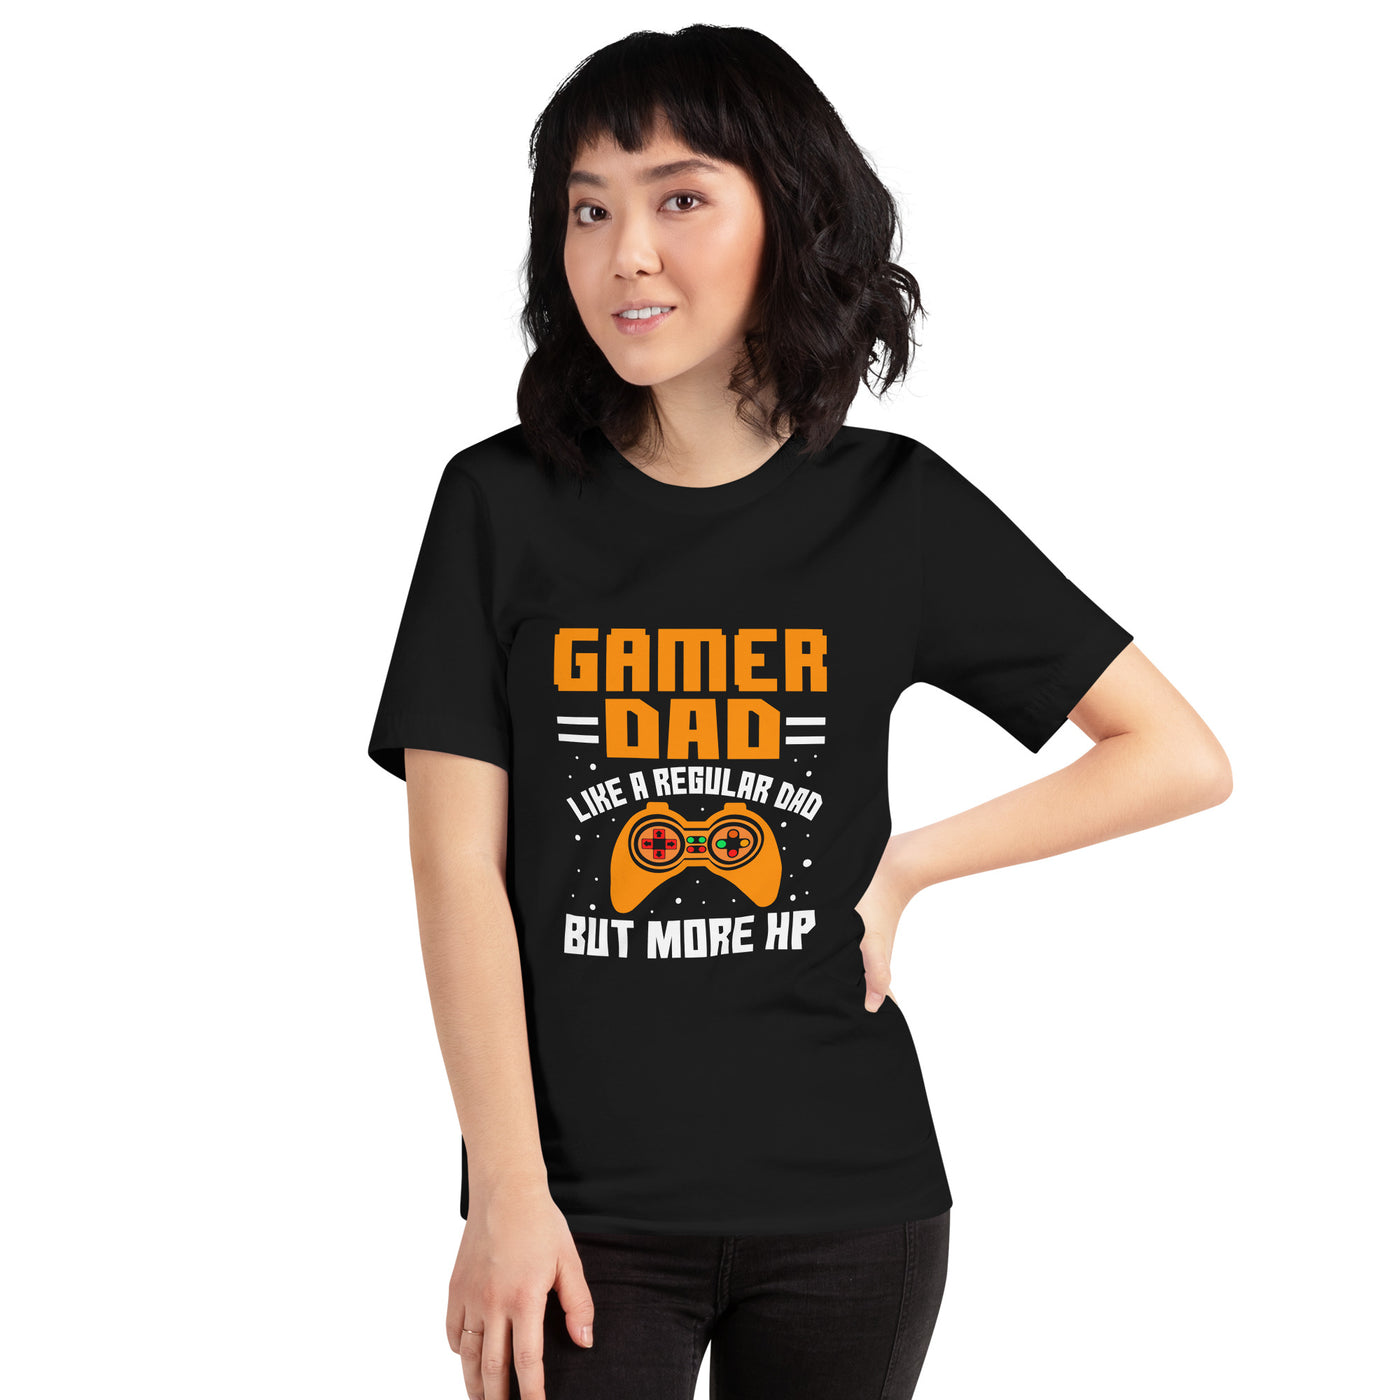 Gamer Dad like a normal one but more HP - Unisex t-shirt